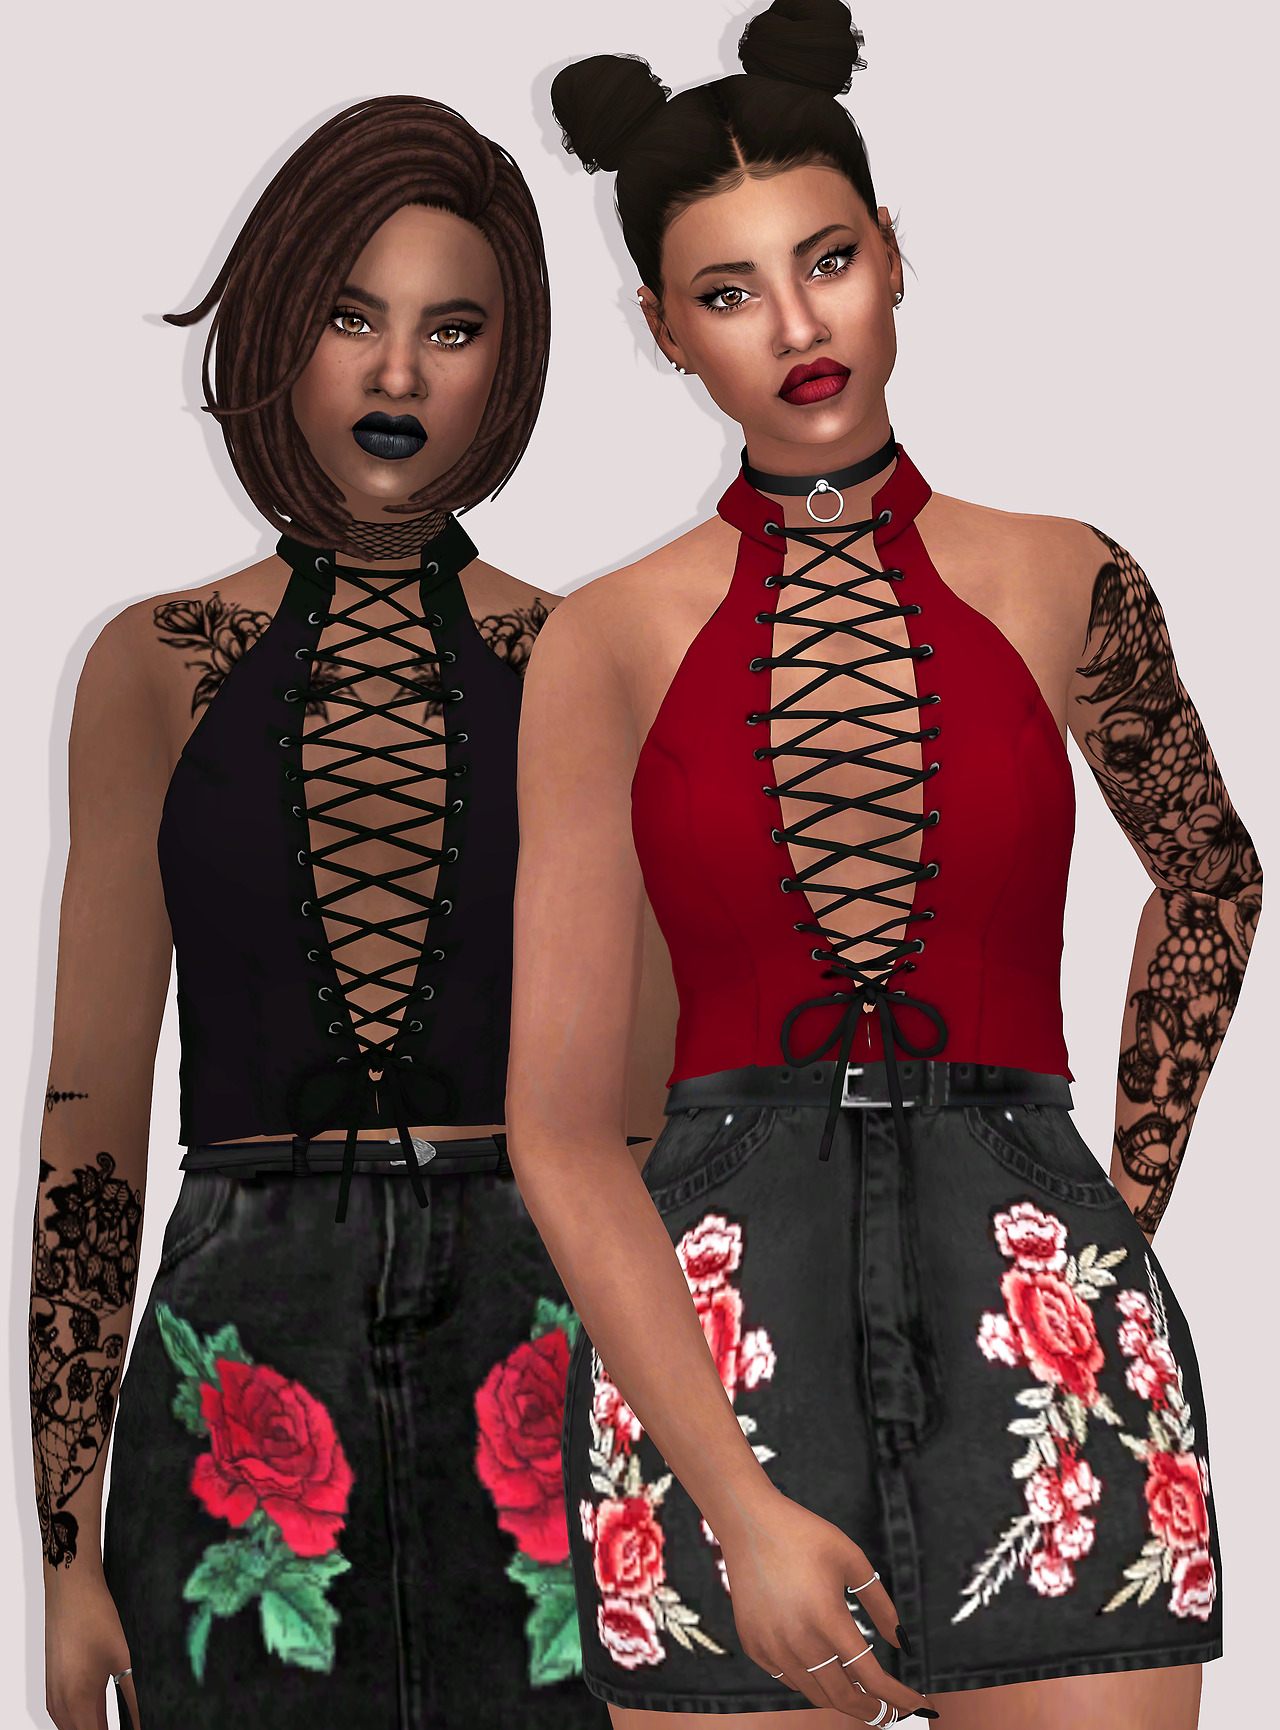 The Sims 4 Cc Lumy Sims Cc Eclipse Top 30 Swatches Hq Mod